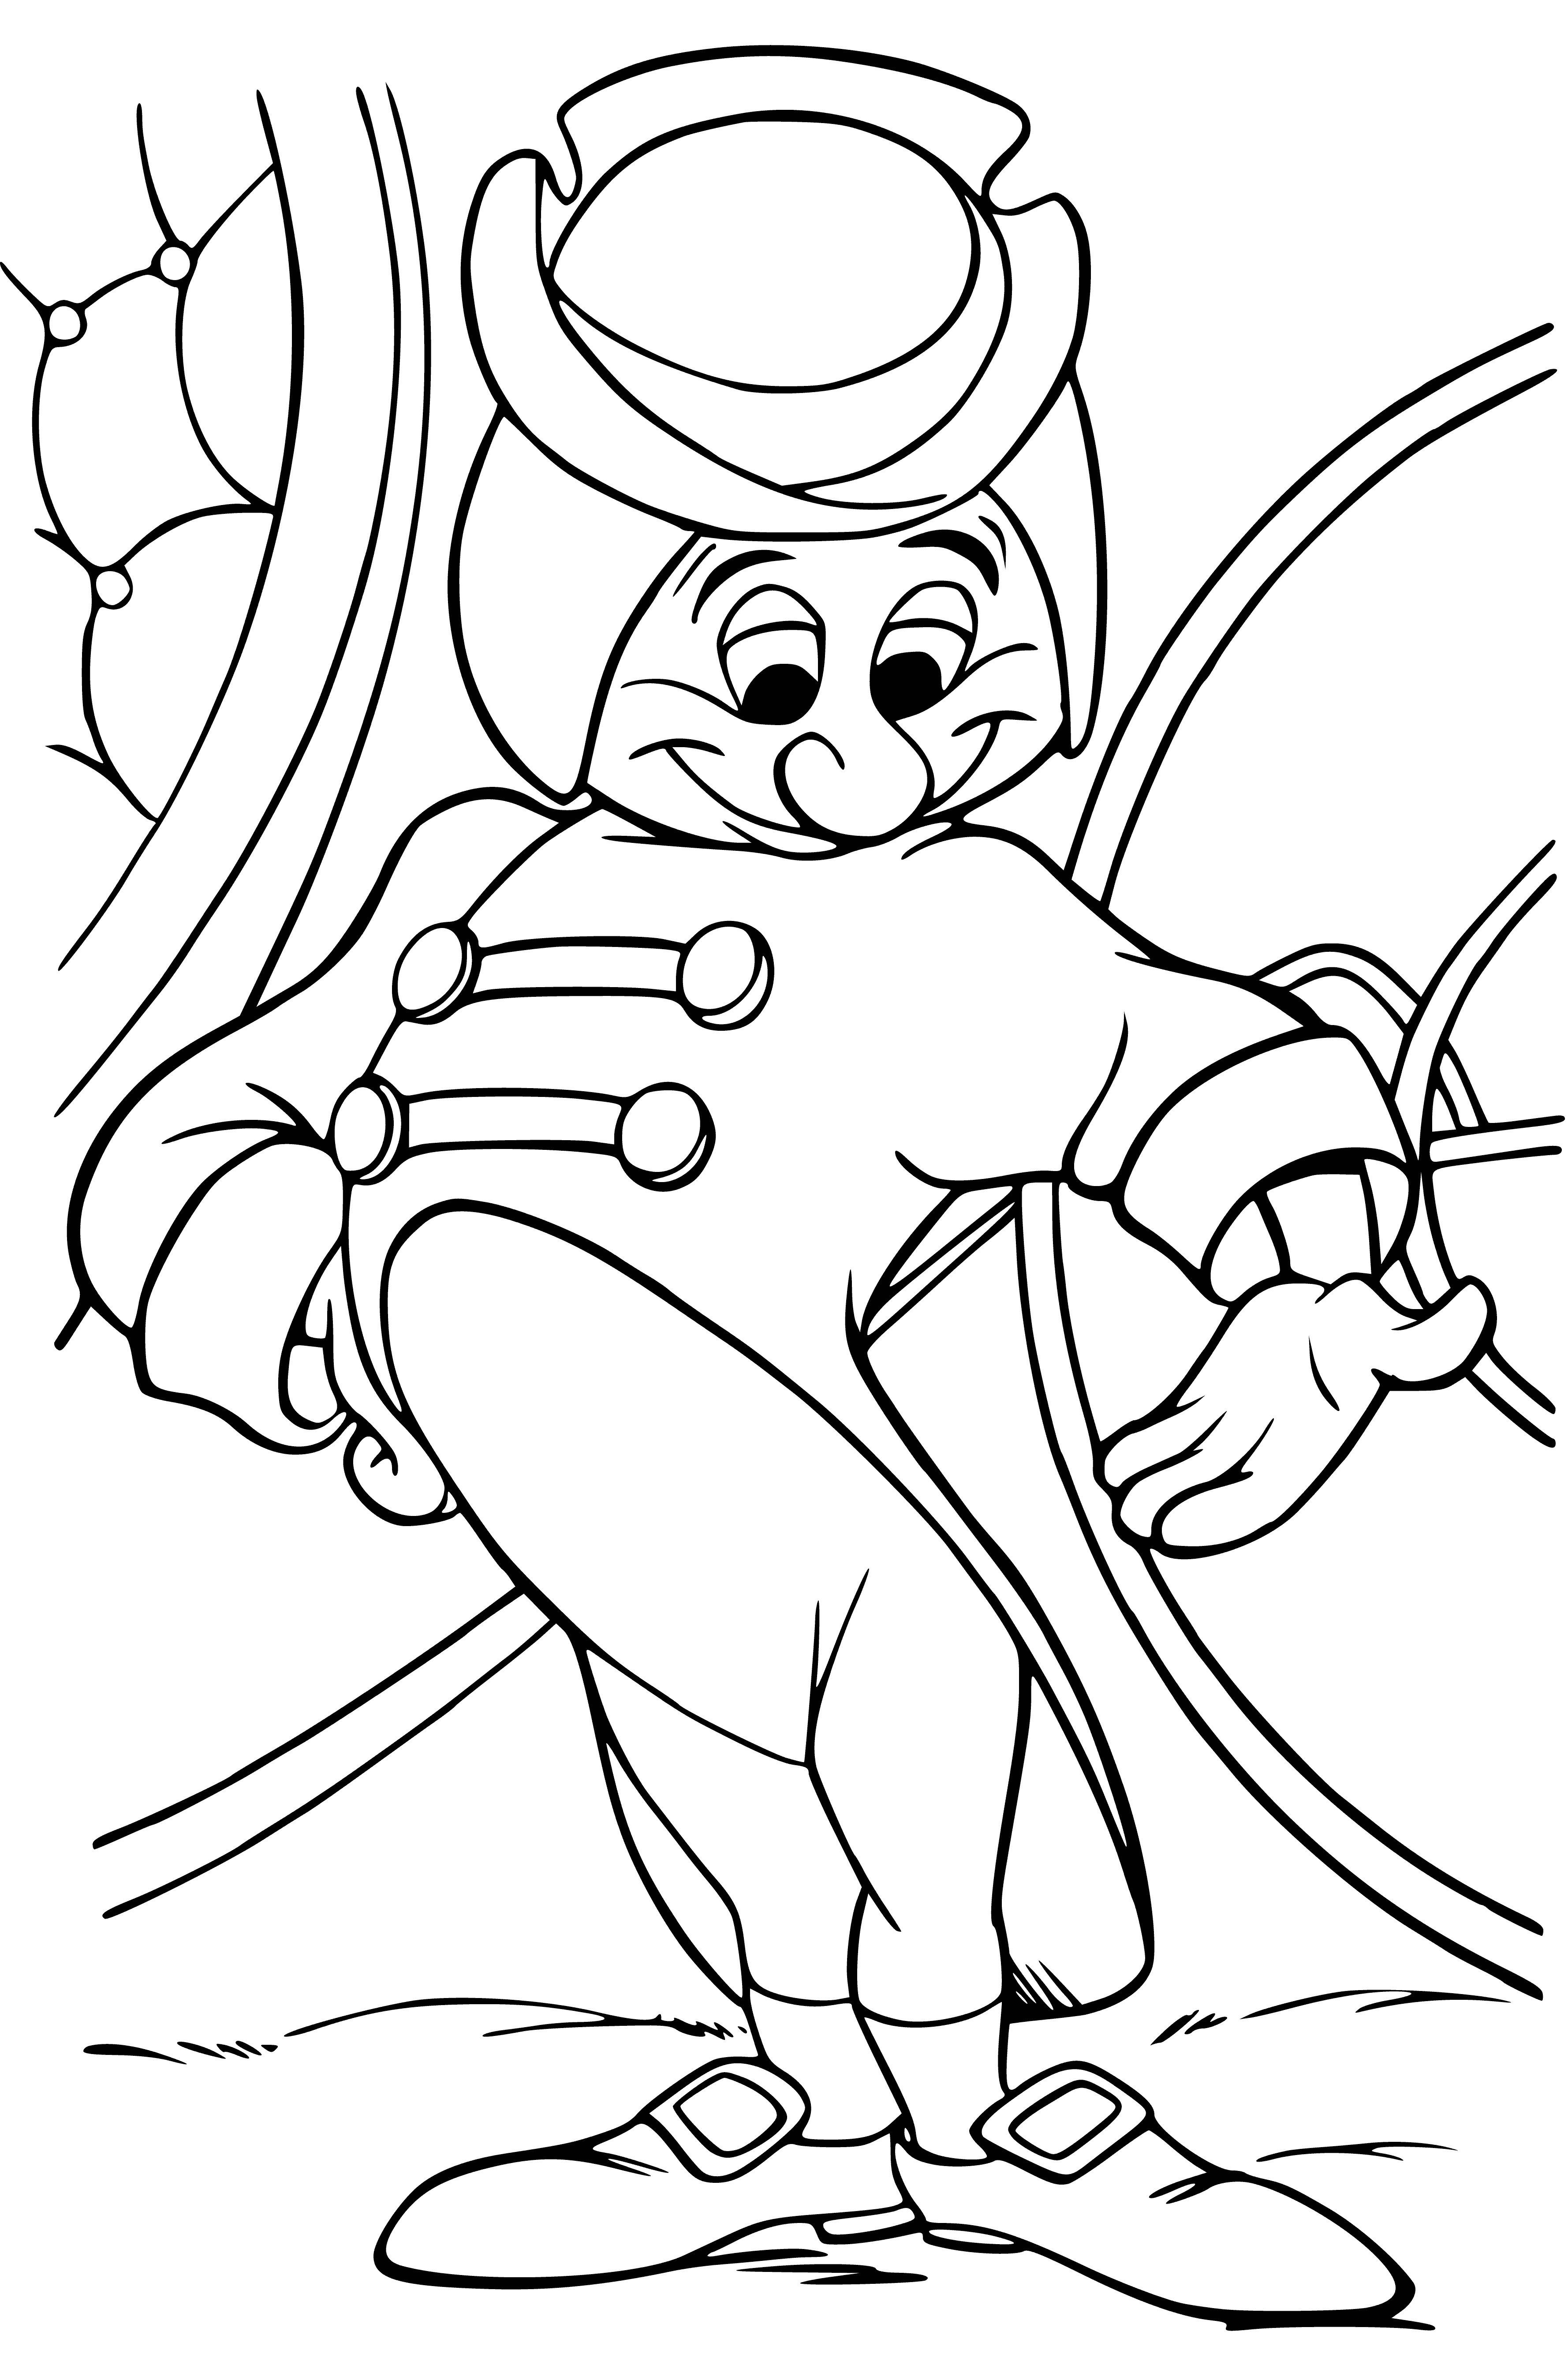 became a lackey coloring page